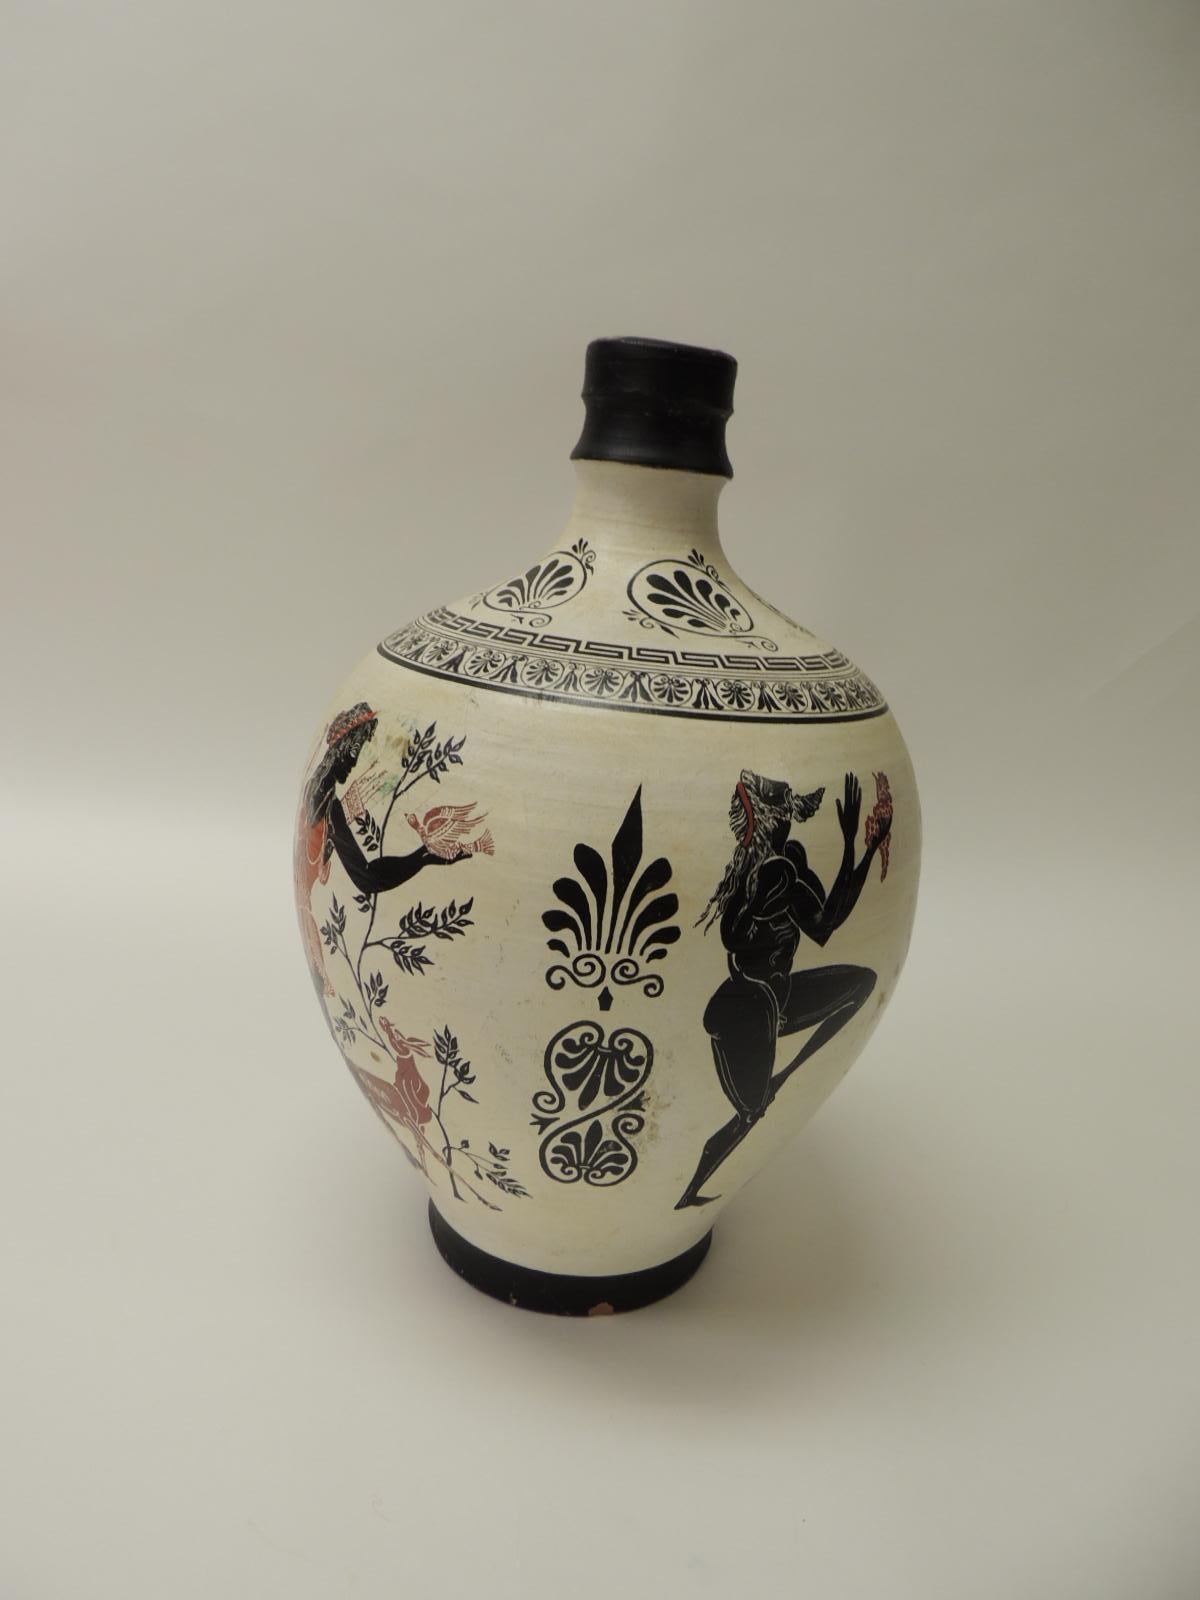 Vintage encaustic hand painted terracotta Greek water jug with handle. Tall hand painted jar depicting traditional Greek mythology figures and Greek key pattern in shades of white, black, pink, orange, green and gold. There are many animals